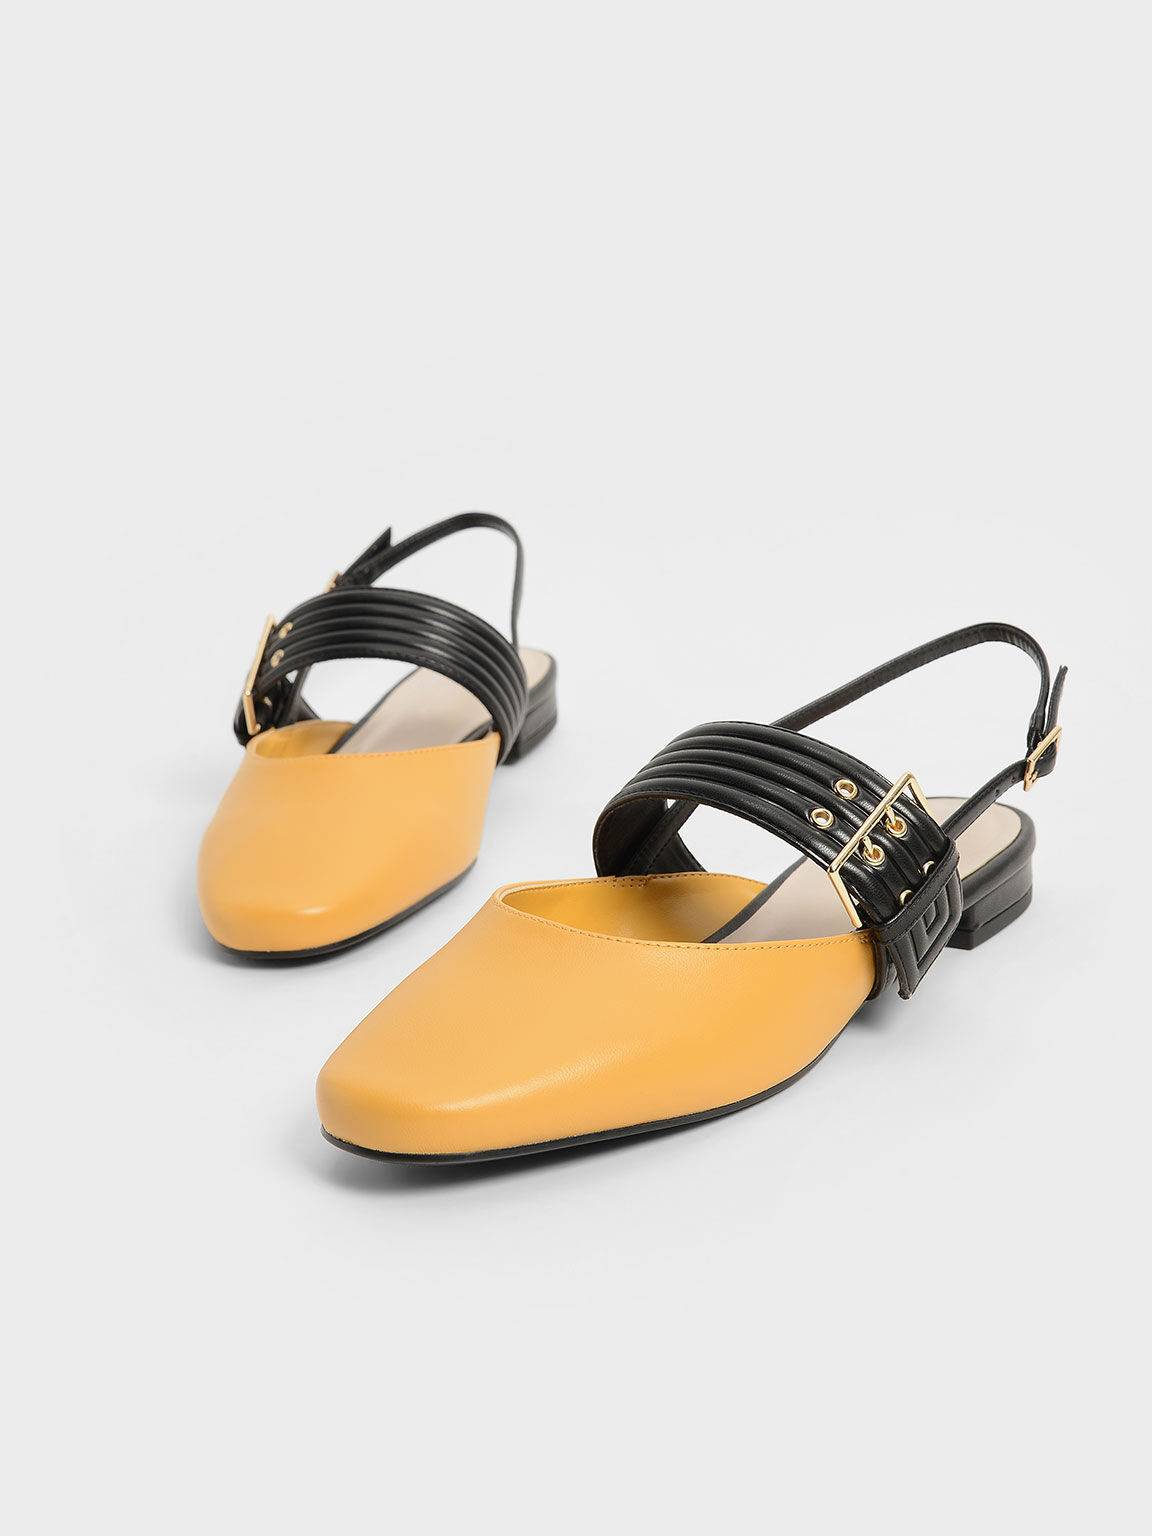 Grommet Strap Slingback Mary Janes, Yellow, hi-res